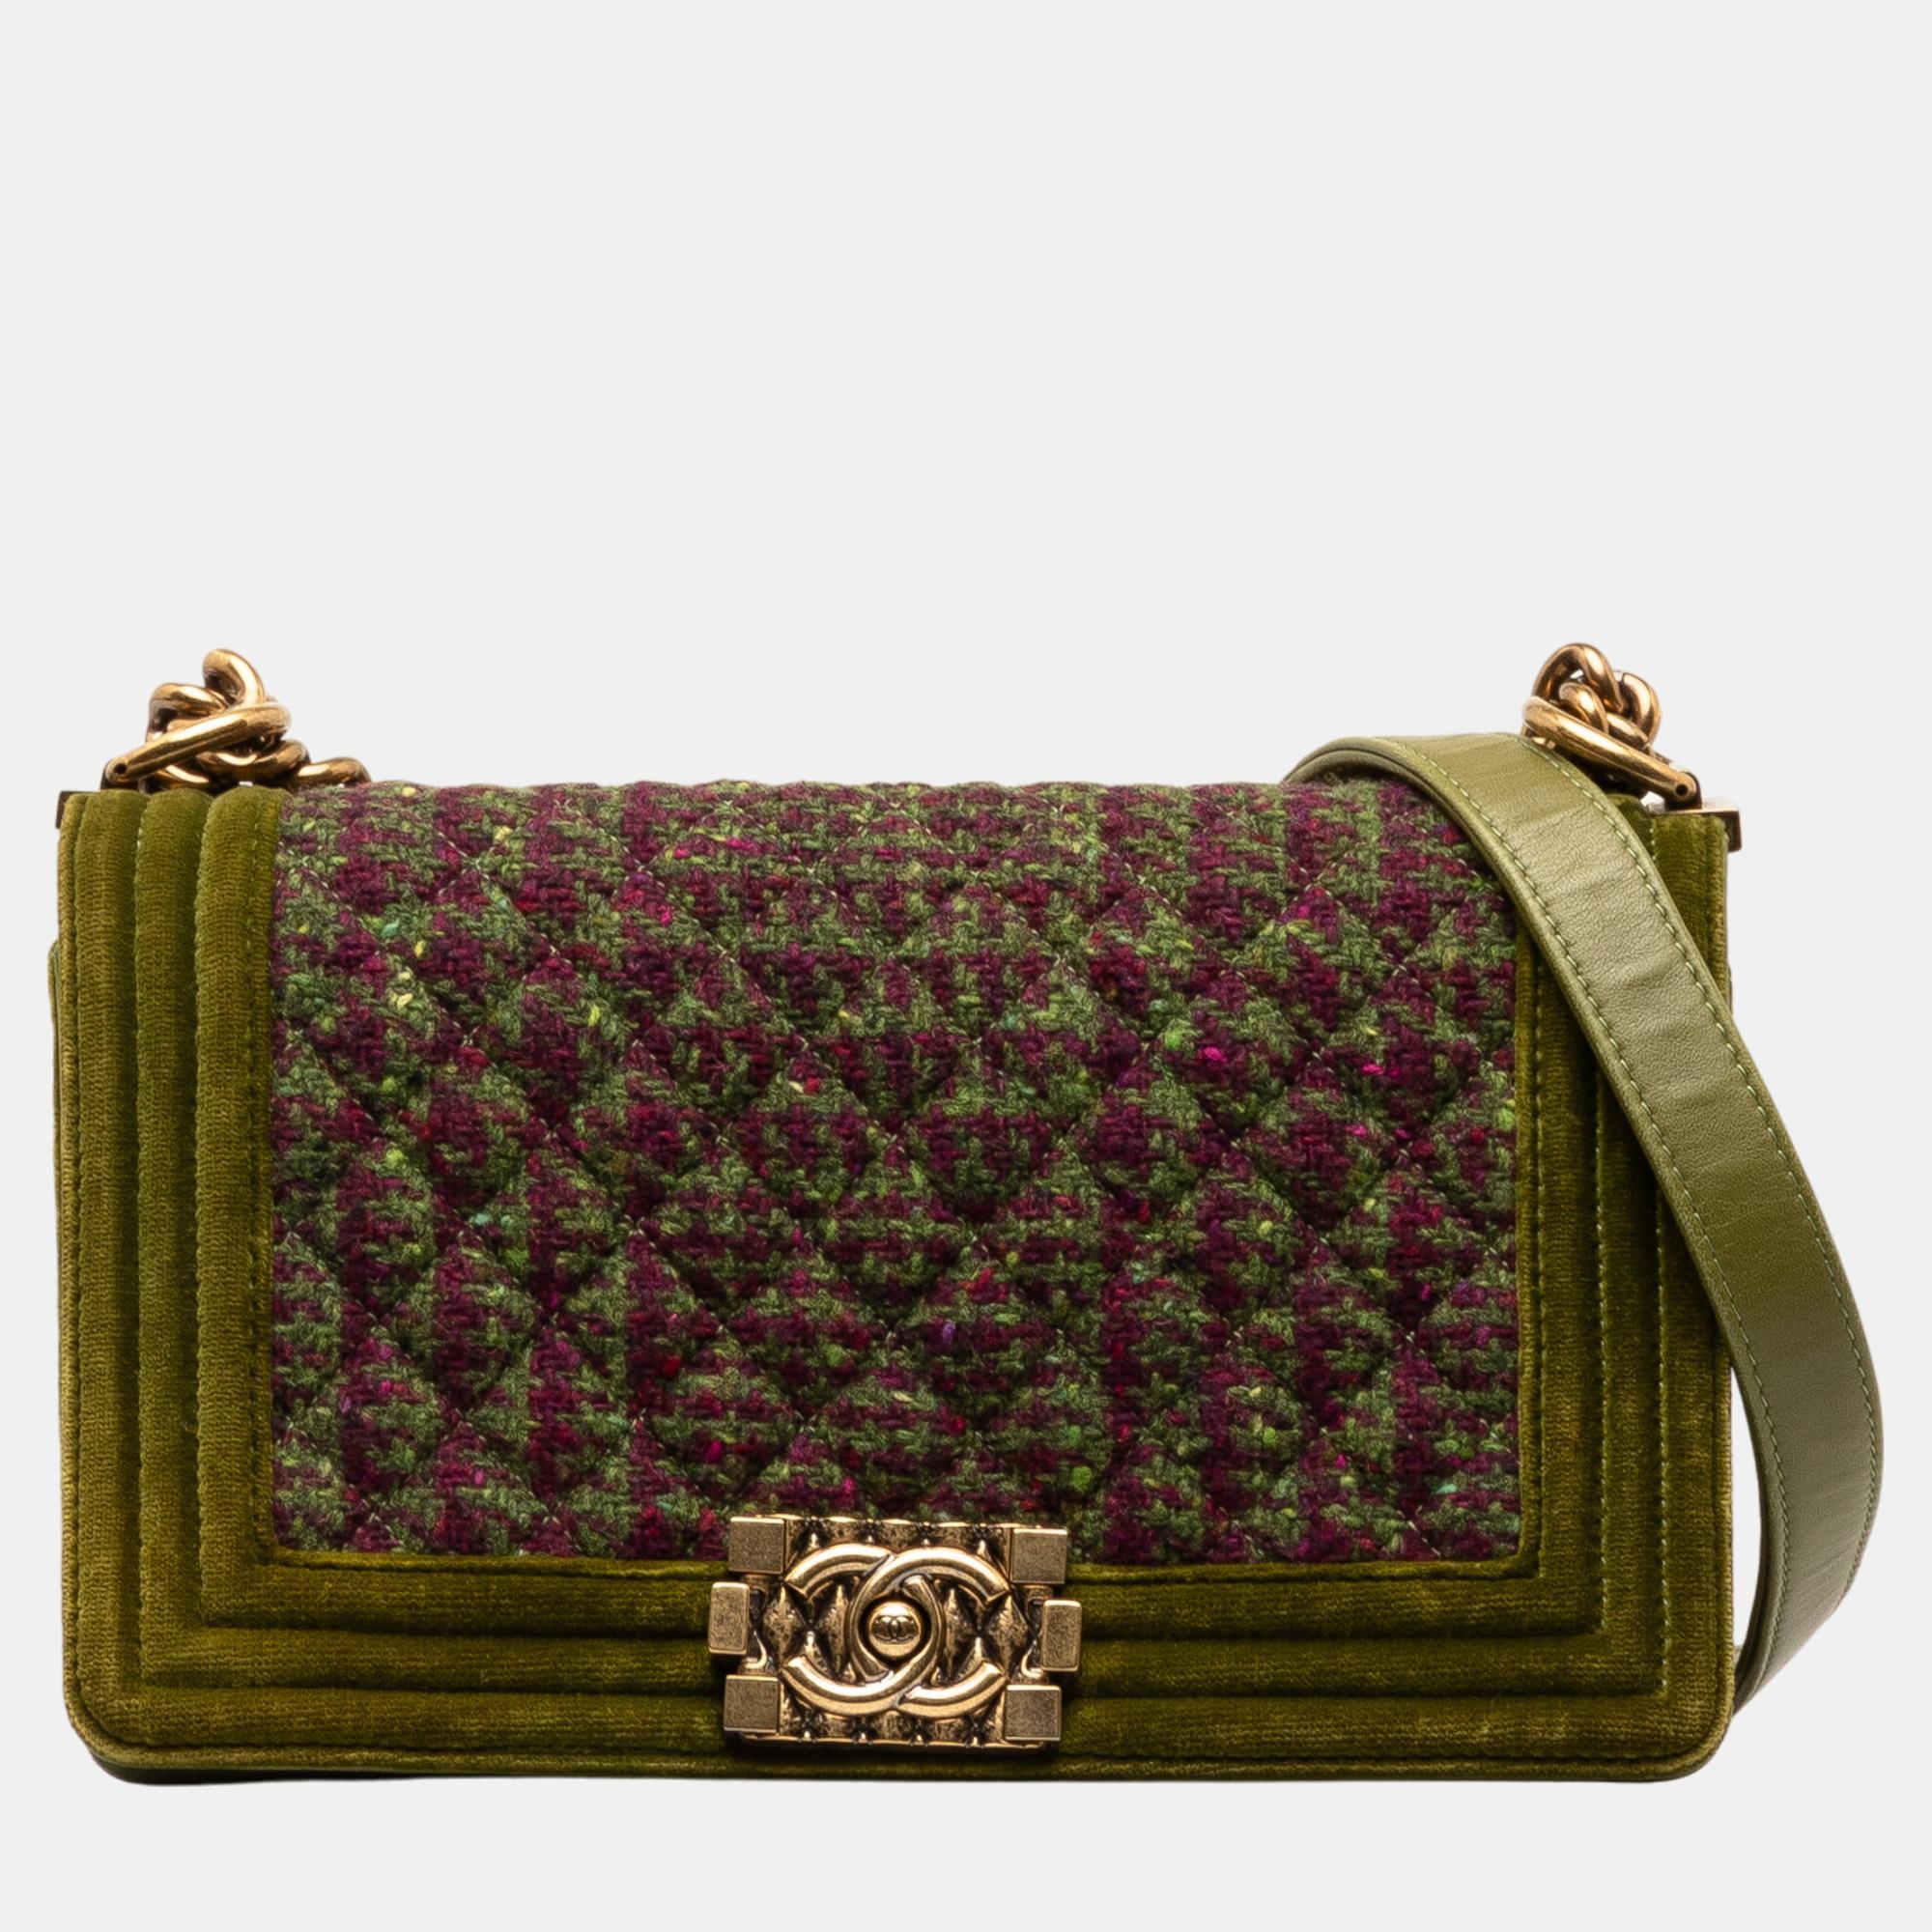 Chanel green/pink small tweed and velvet boy flap